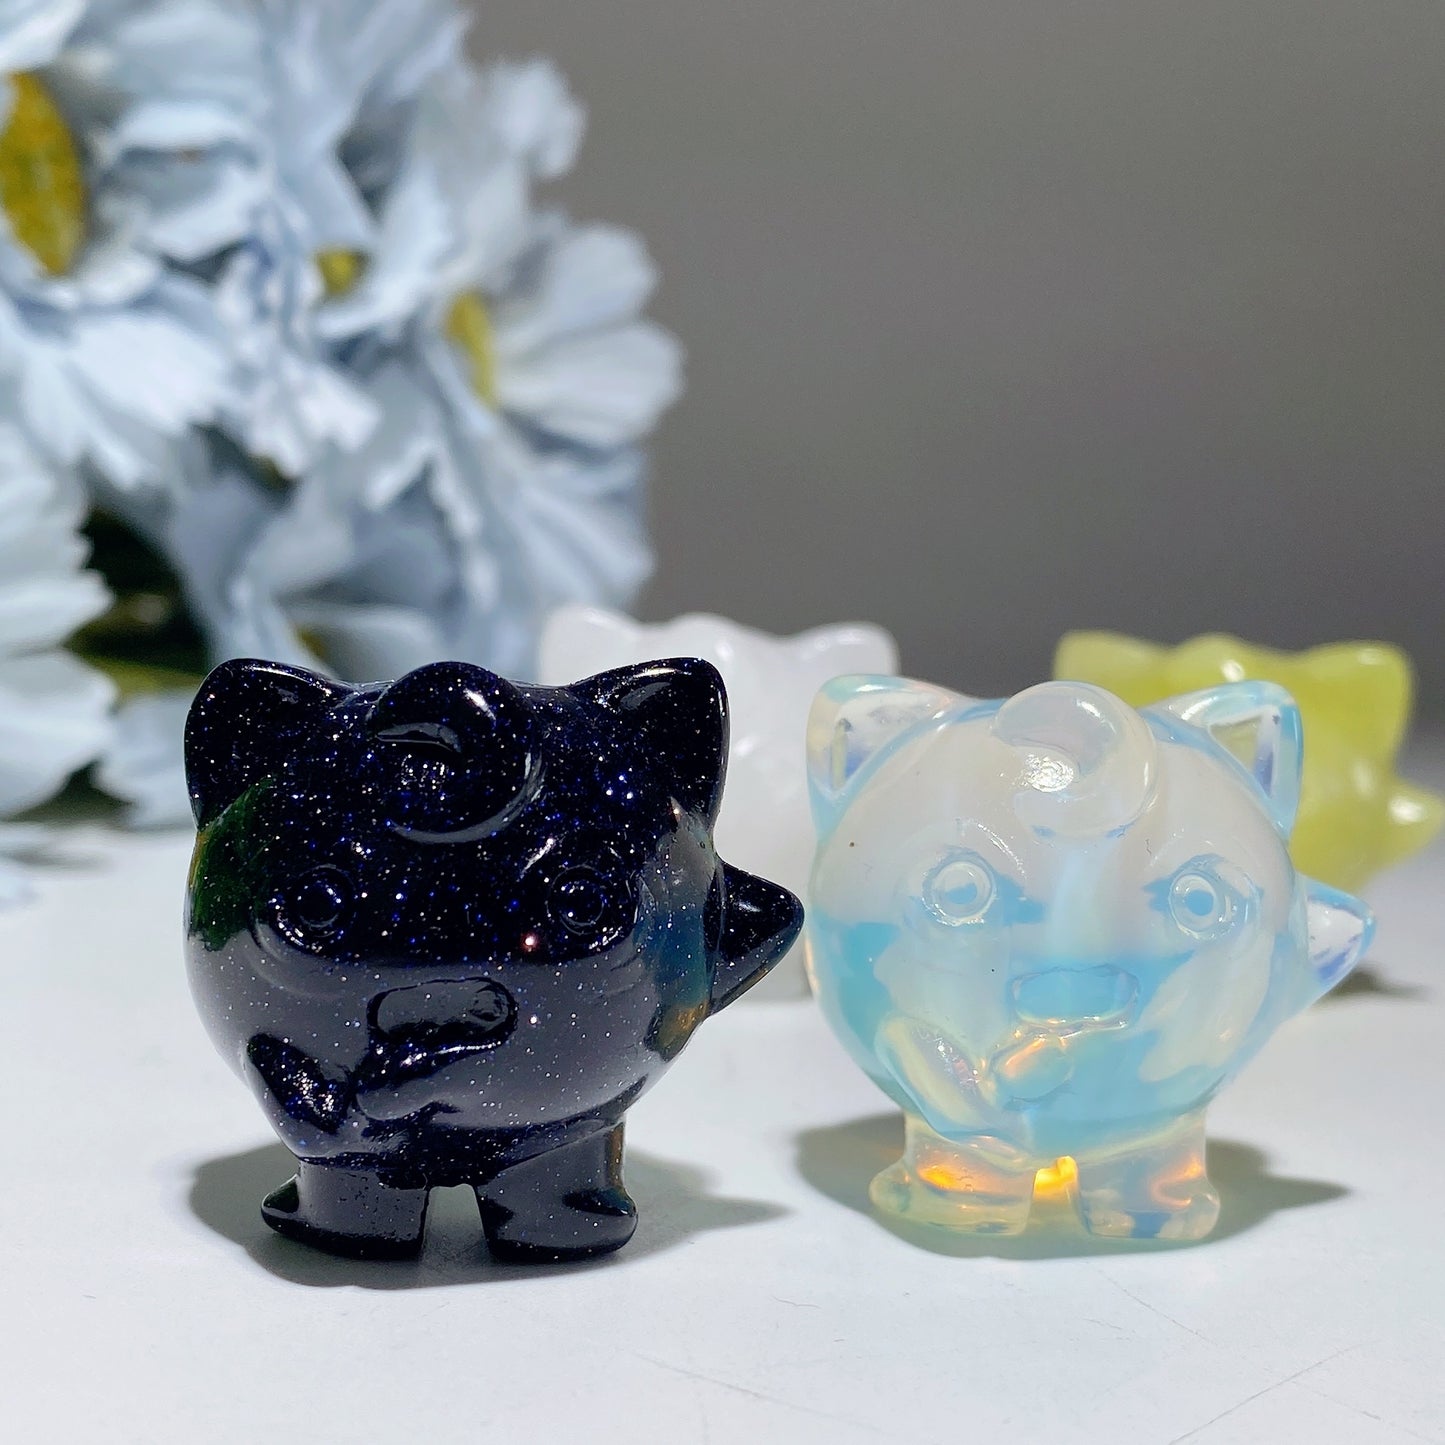 1.1” Mixed Crystal Pokemon Series Jiggly Puff Carvings Bulk Wholesale